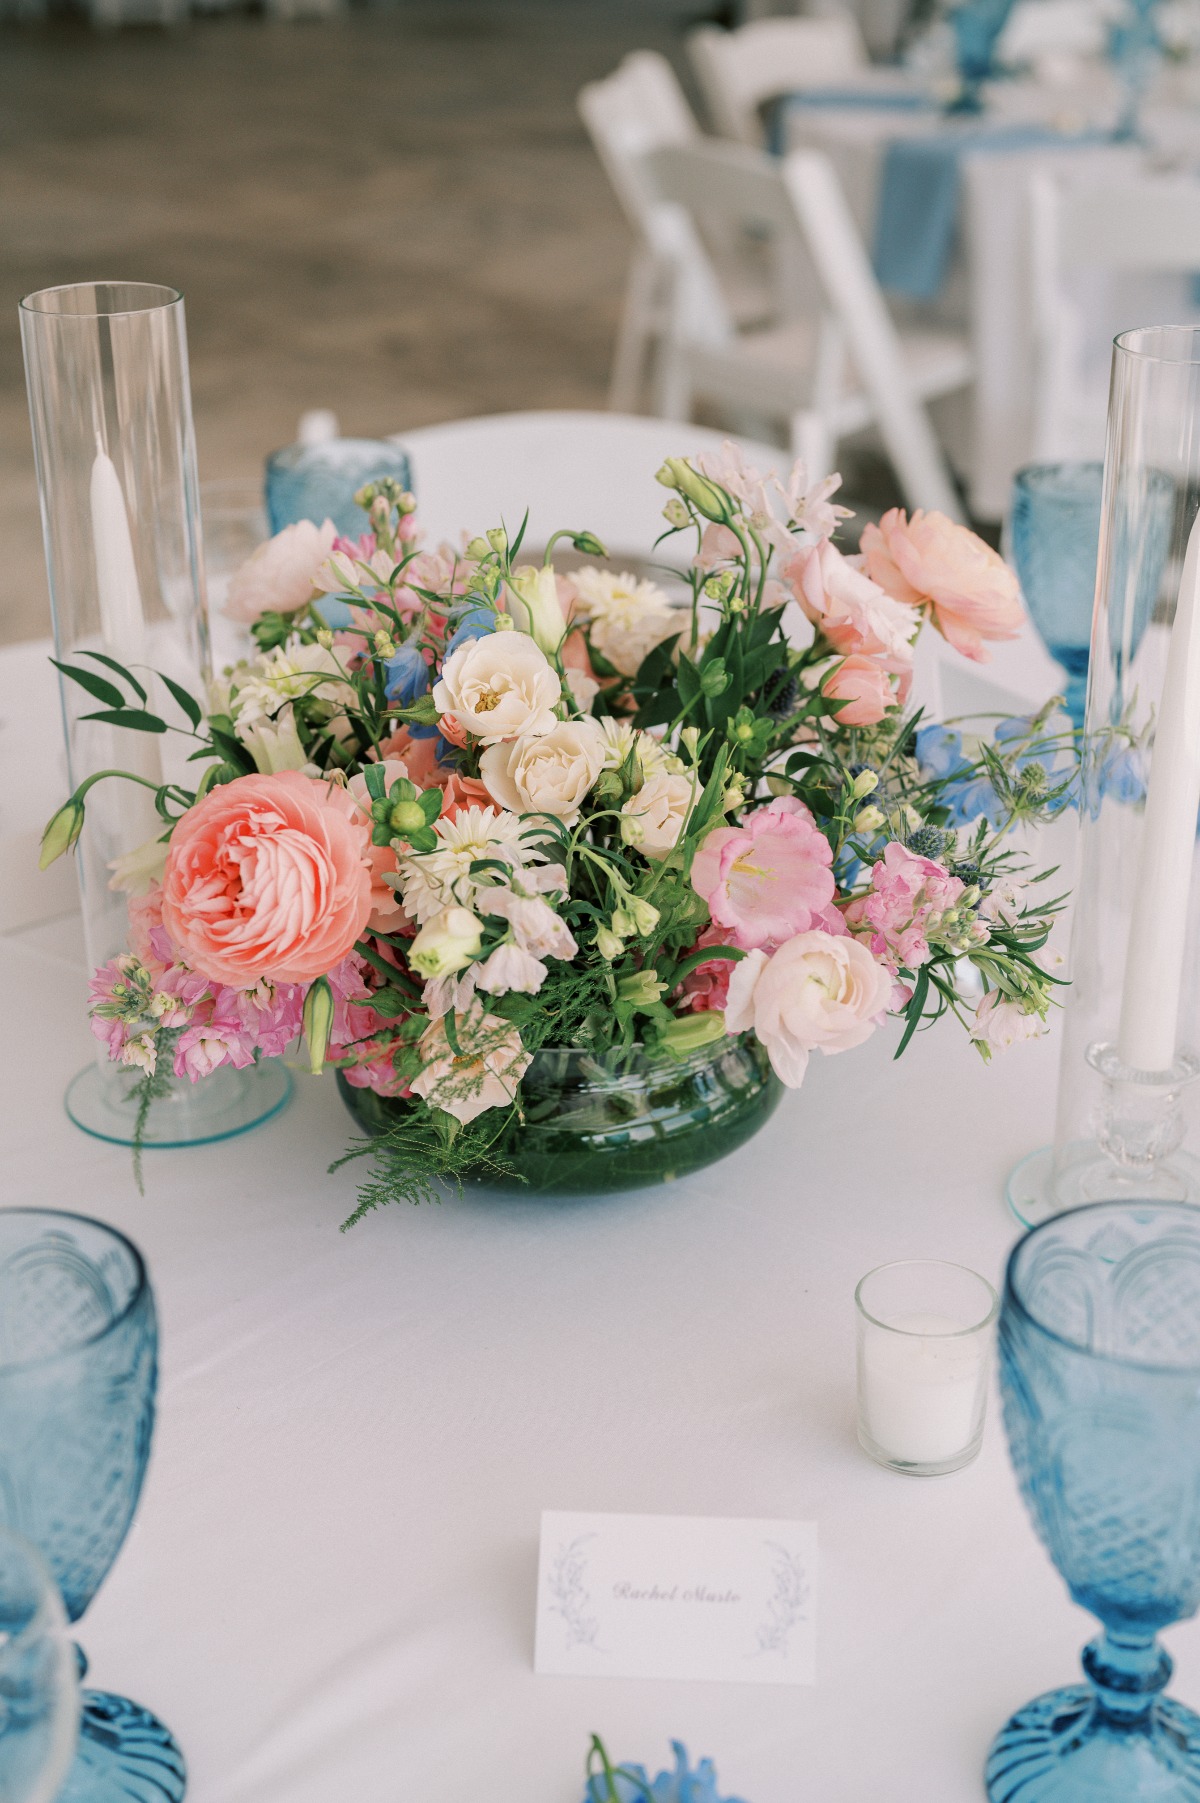 Lush pastel pink and light blue accented reception centerpieces